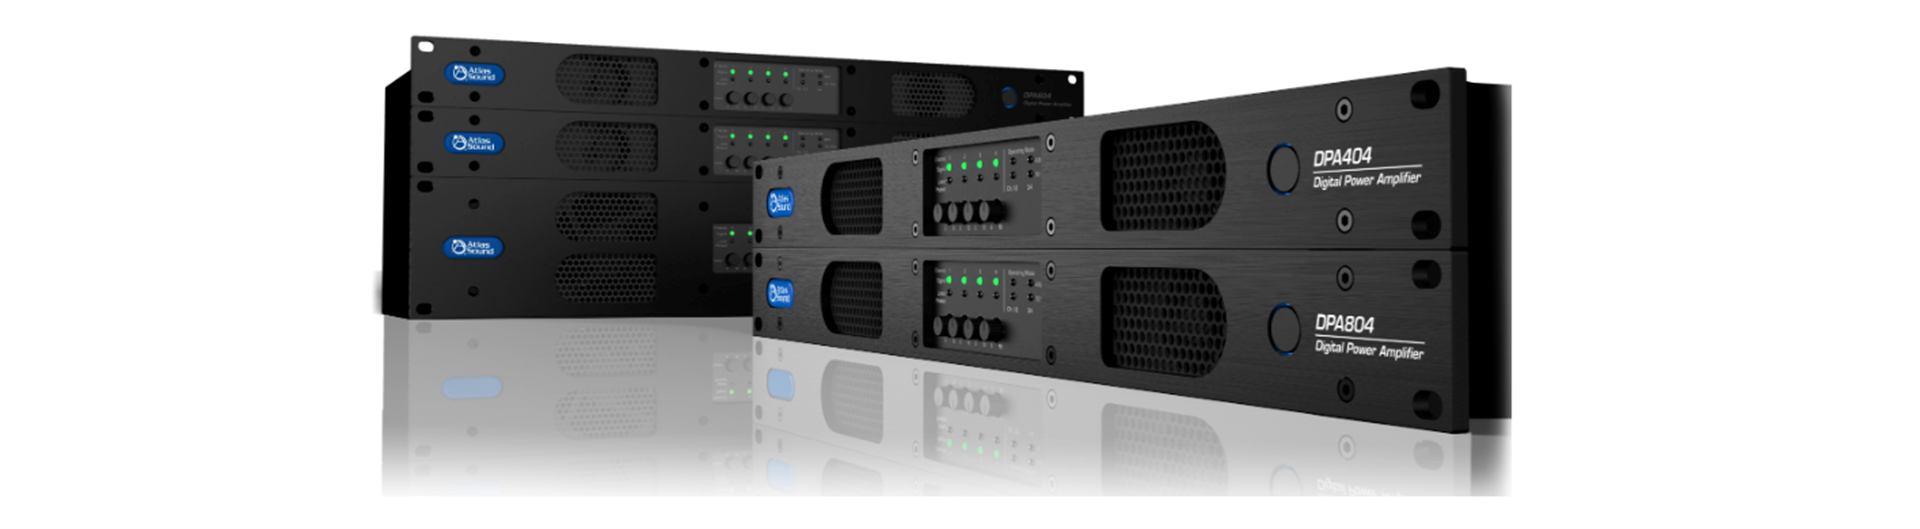 AtlasIED Expands "Installer's Dream" Series of Amplifiers